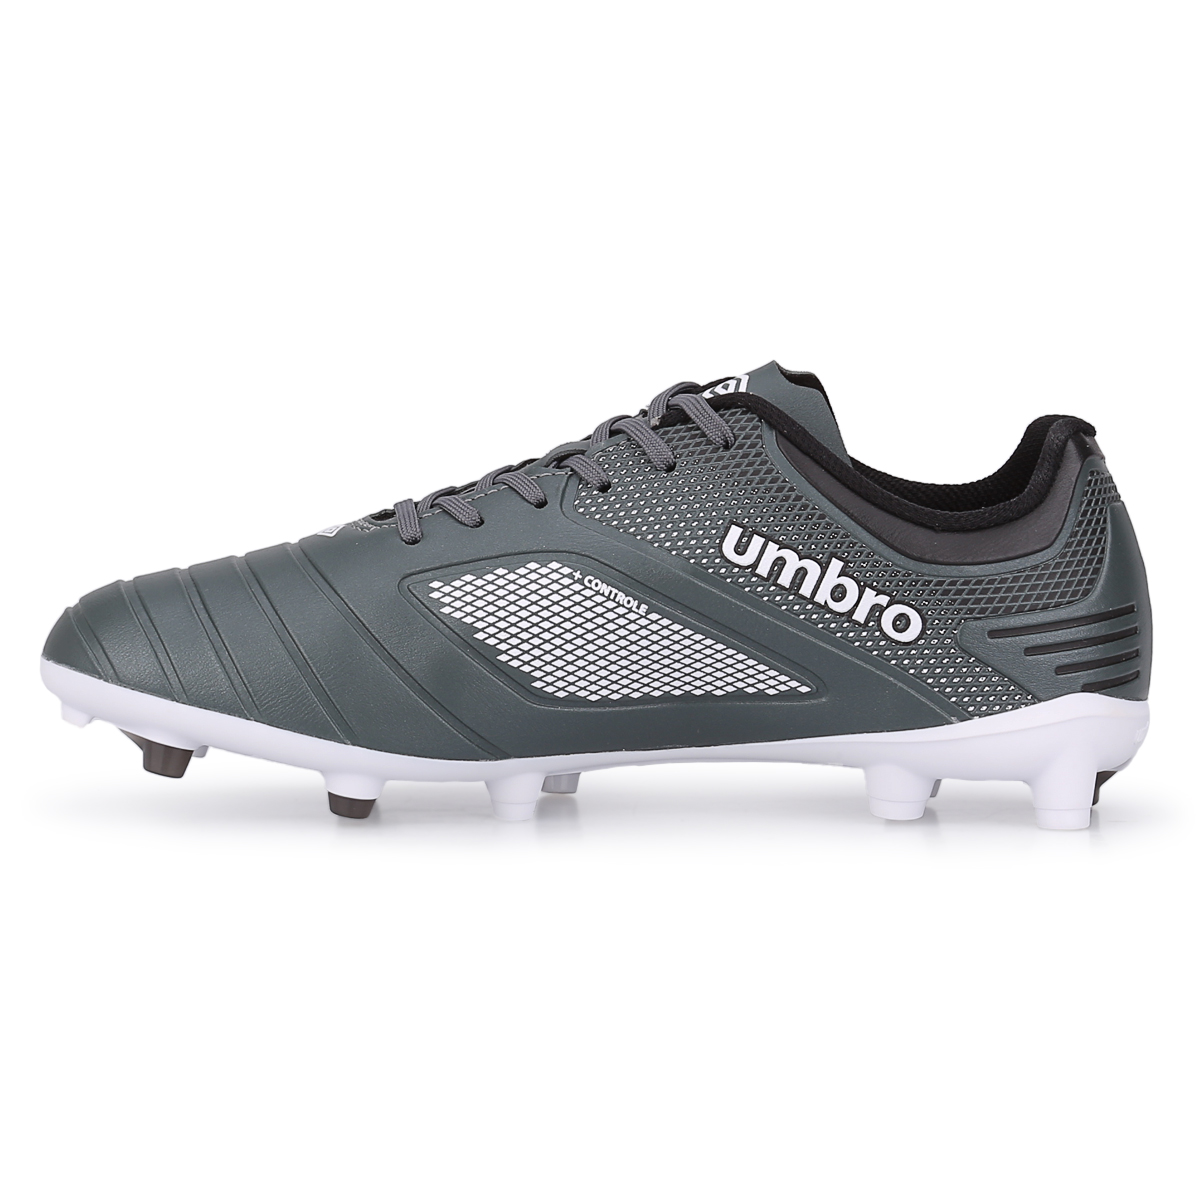 Botines Umbro Campo Tocco Club,  image number null